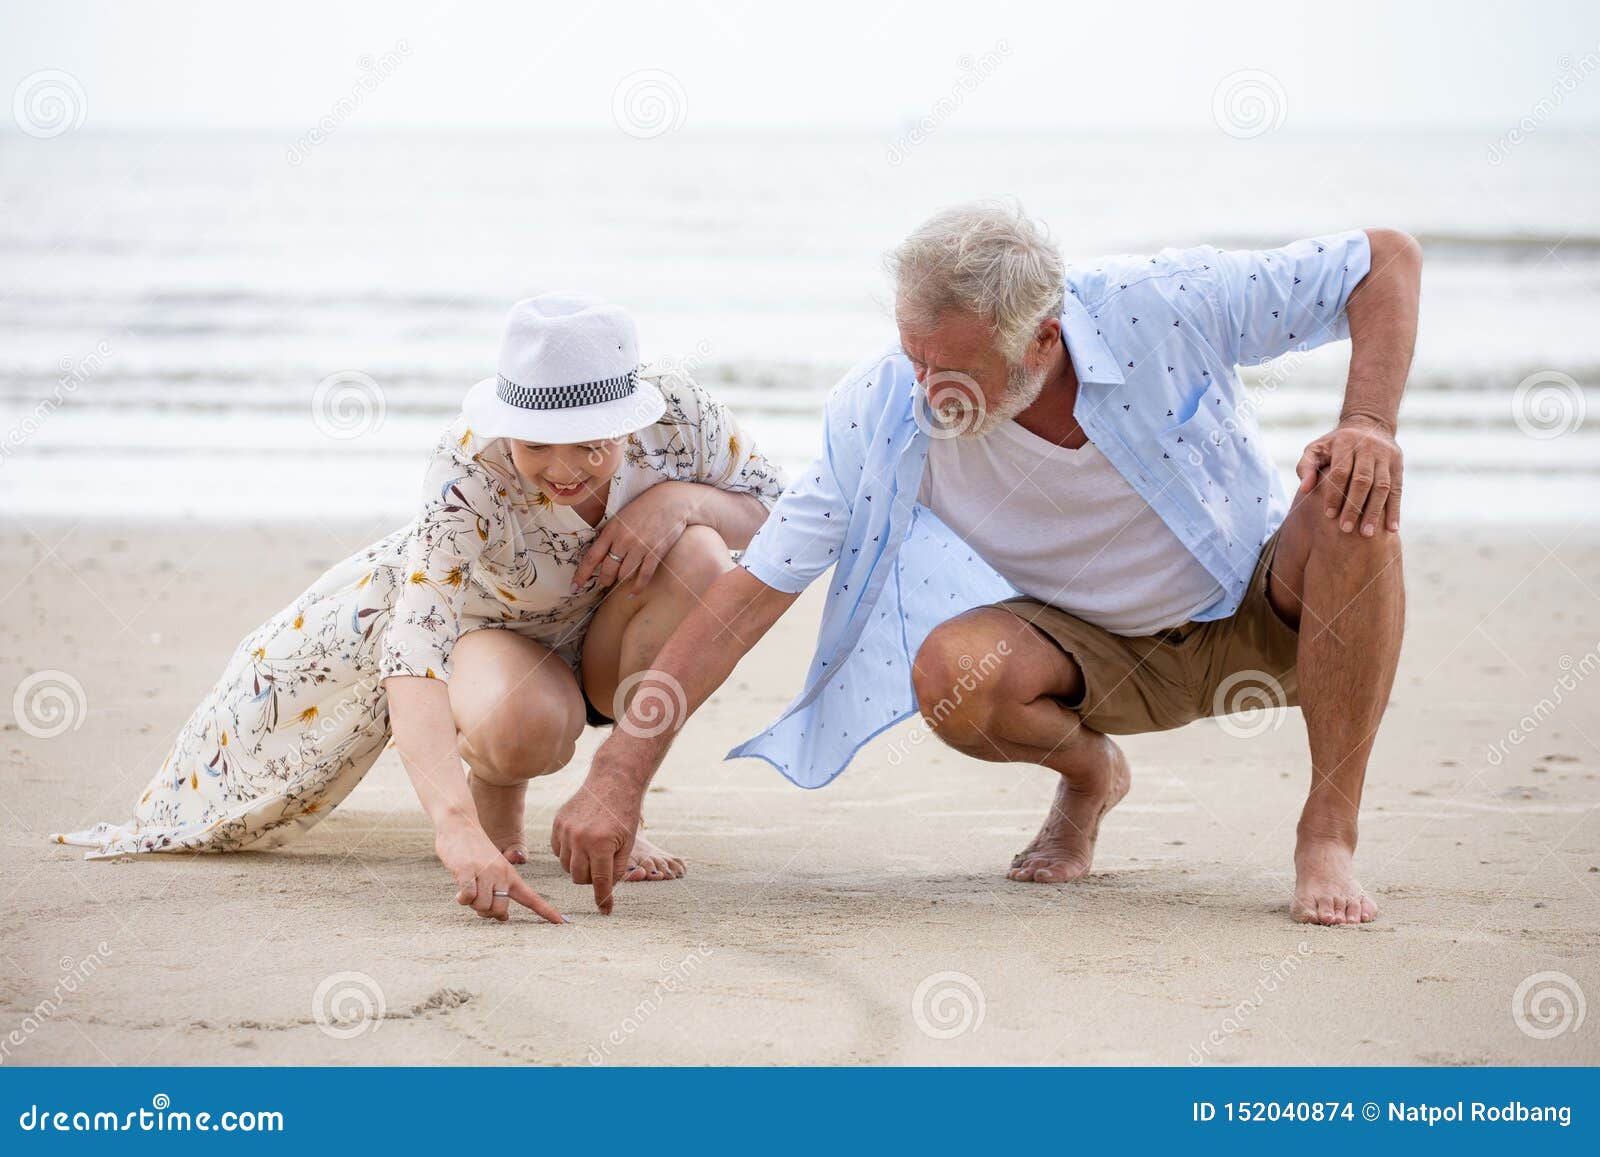 senior couple sitting on the beach drawing a heart in the sand together ,  woman asian man caucasian